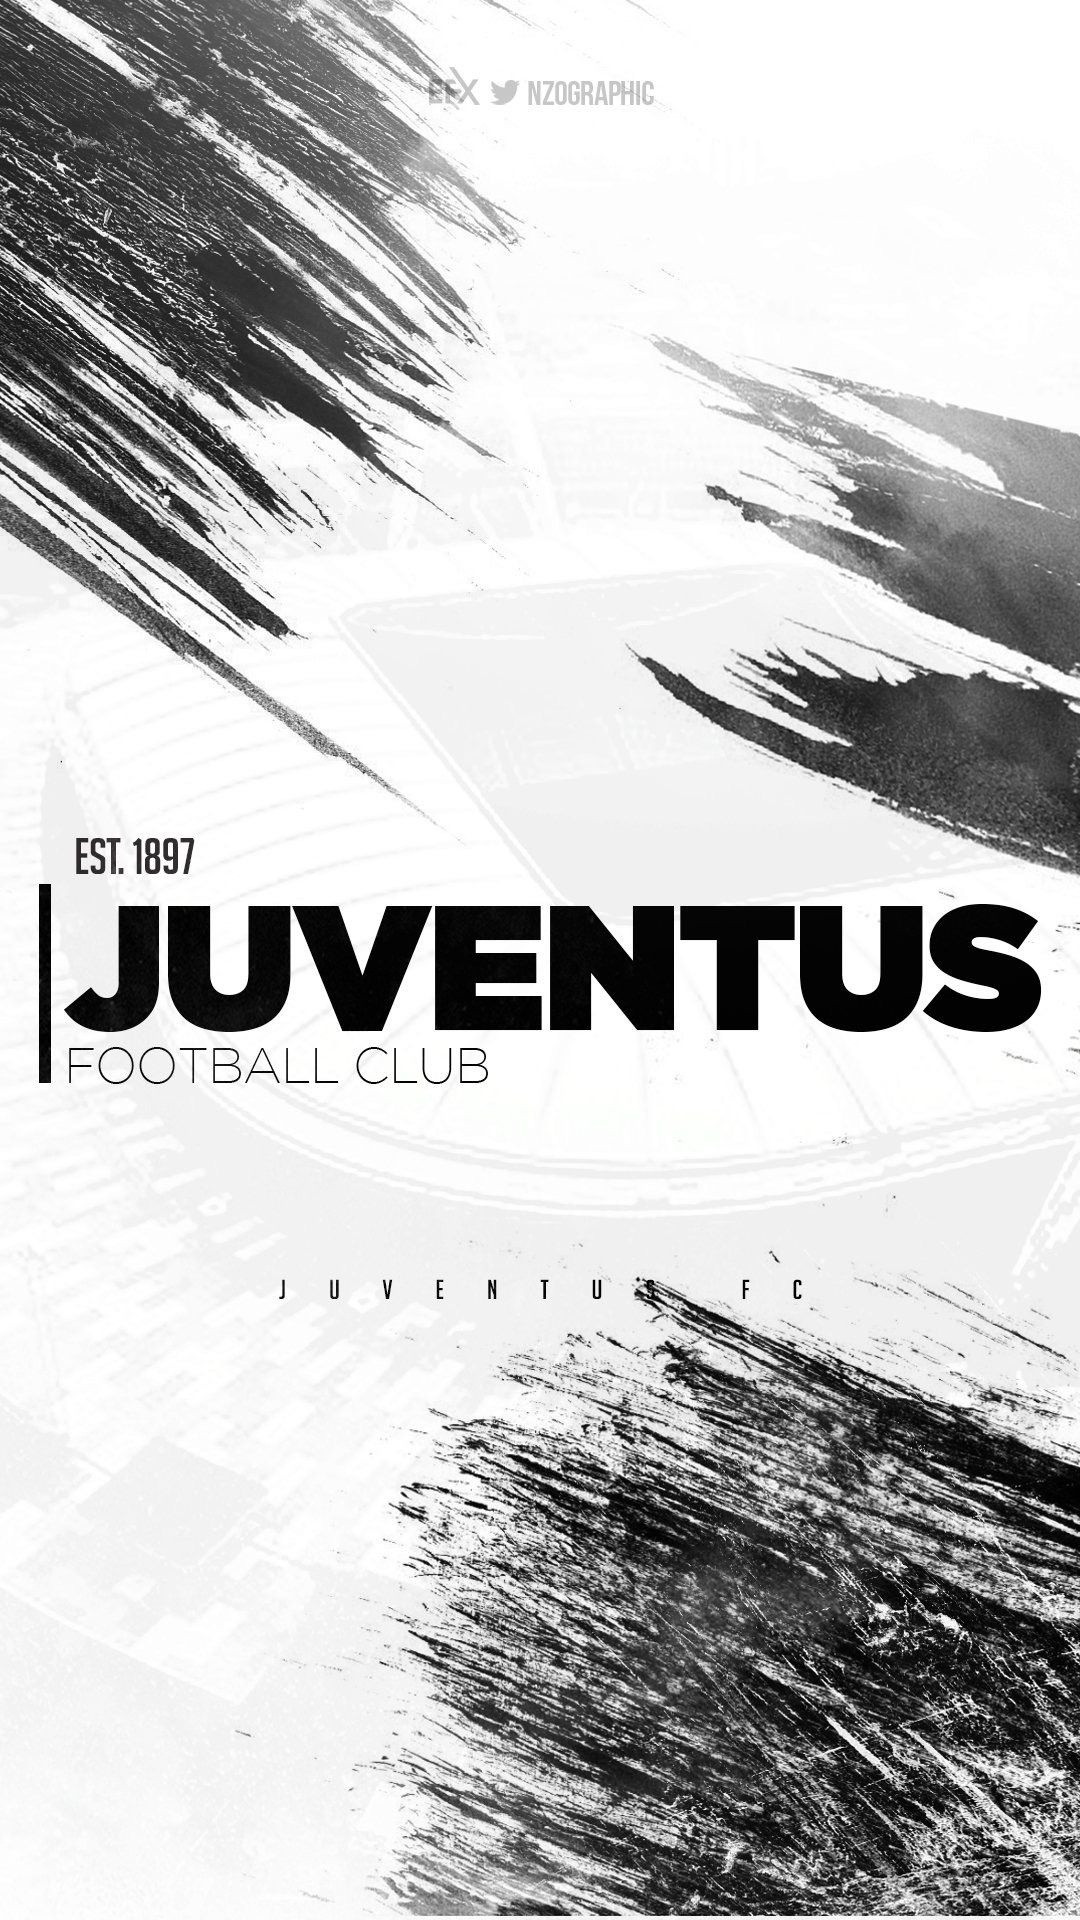 Juventus: Placed seventh in the FIFA's historic ranking of the best clubs in the world, December 2000. 1080x1920 Full HD Background.